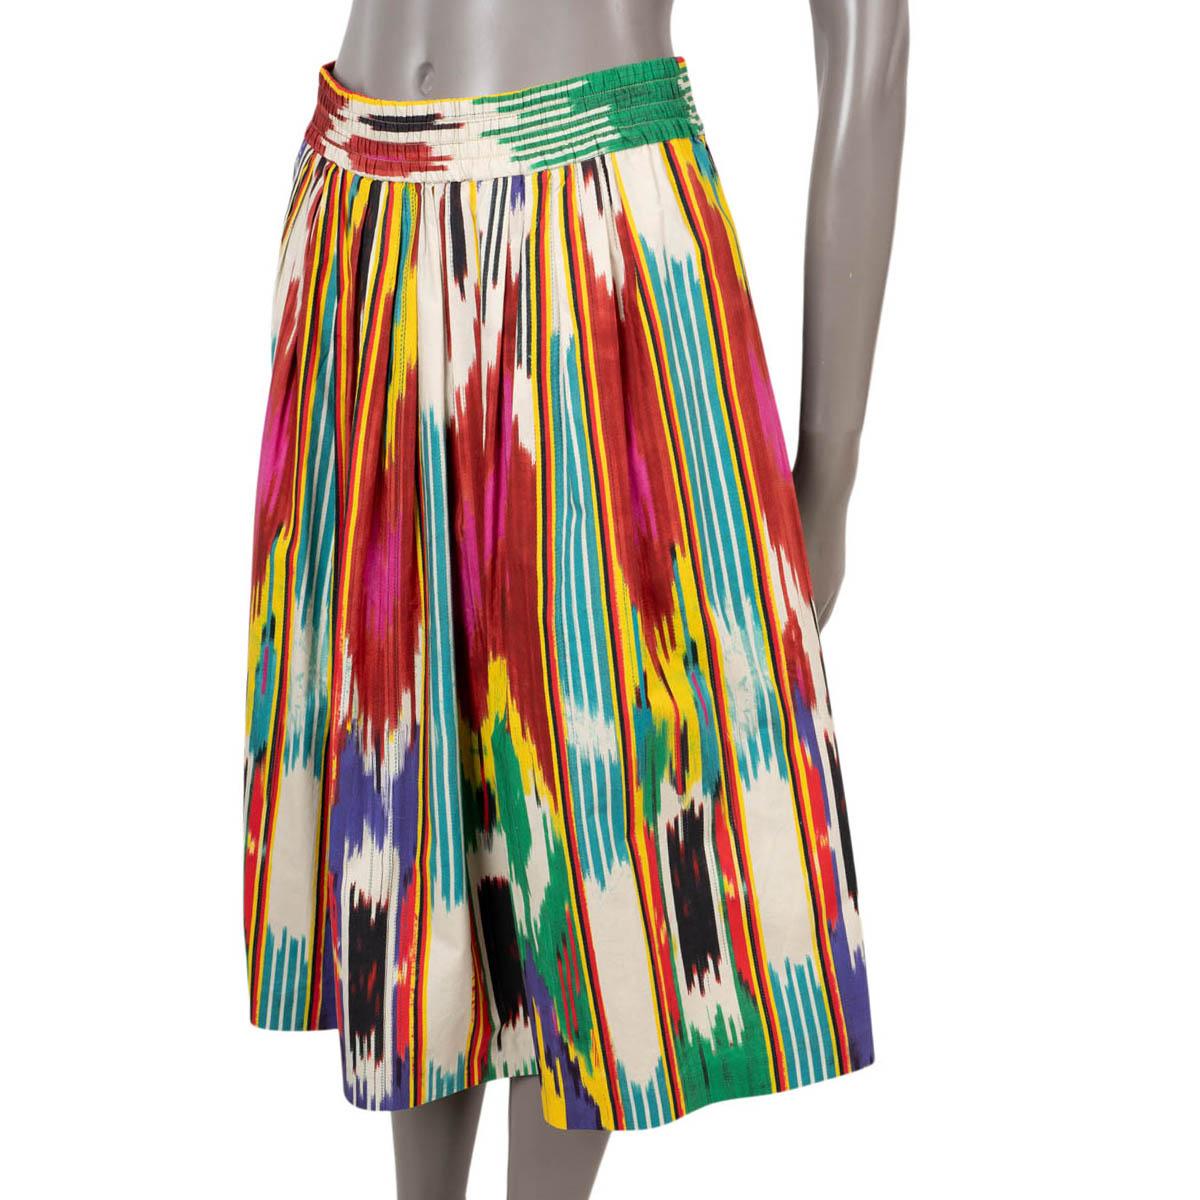 100% authentic Etro Ikat printed flared midi skirt in multicolor cotton (100%). The design features an elastic waistband, side slit pockets and is unlined. Has been worn and is in excellent condition. 

2018

Measurements
Tag